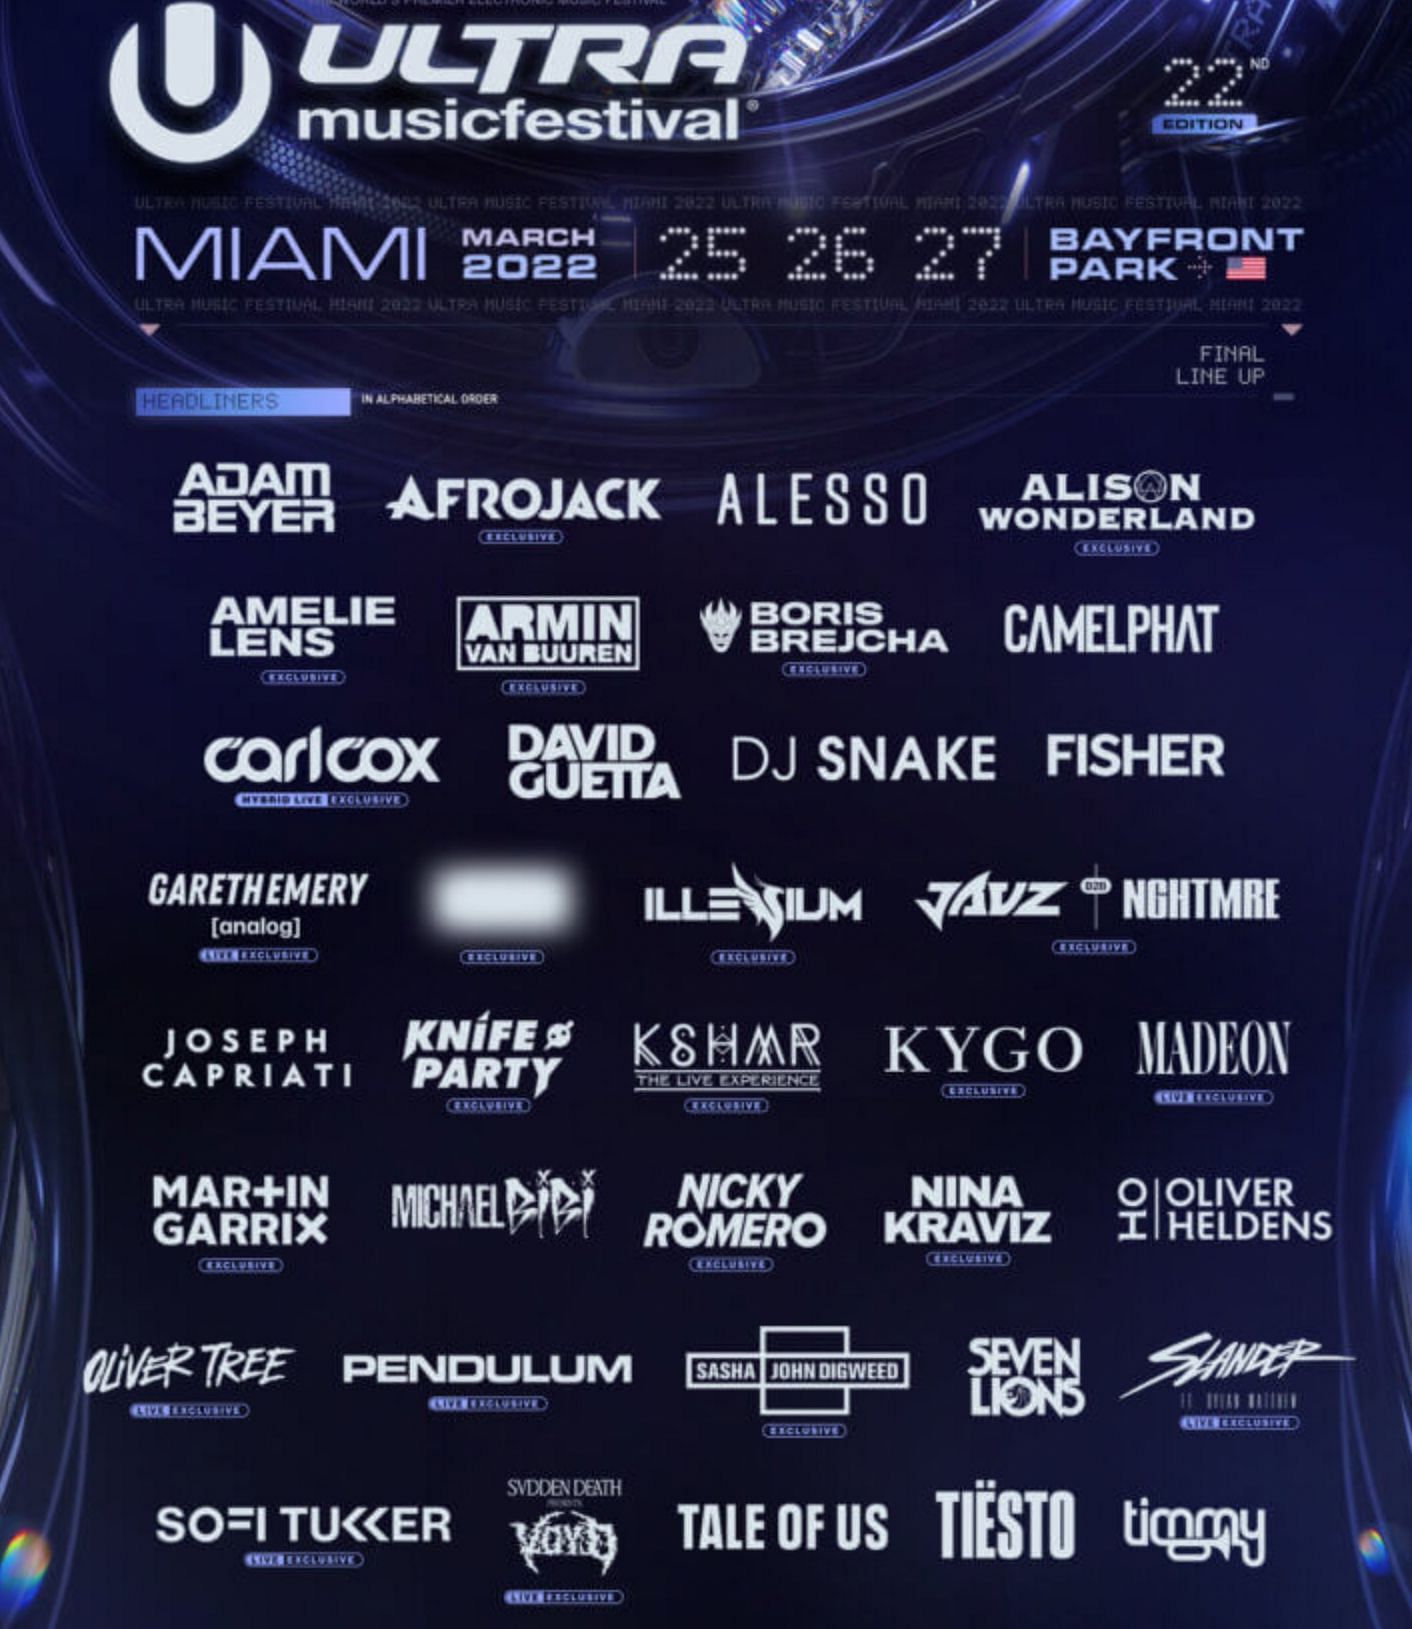 The Ultra 2022 Miami headliners include Alison Wonderland, Illenium, and Carl Cox among others (Image via Ultra Music Festival)